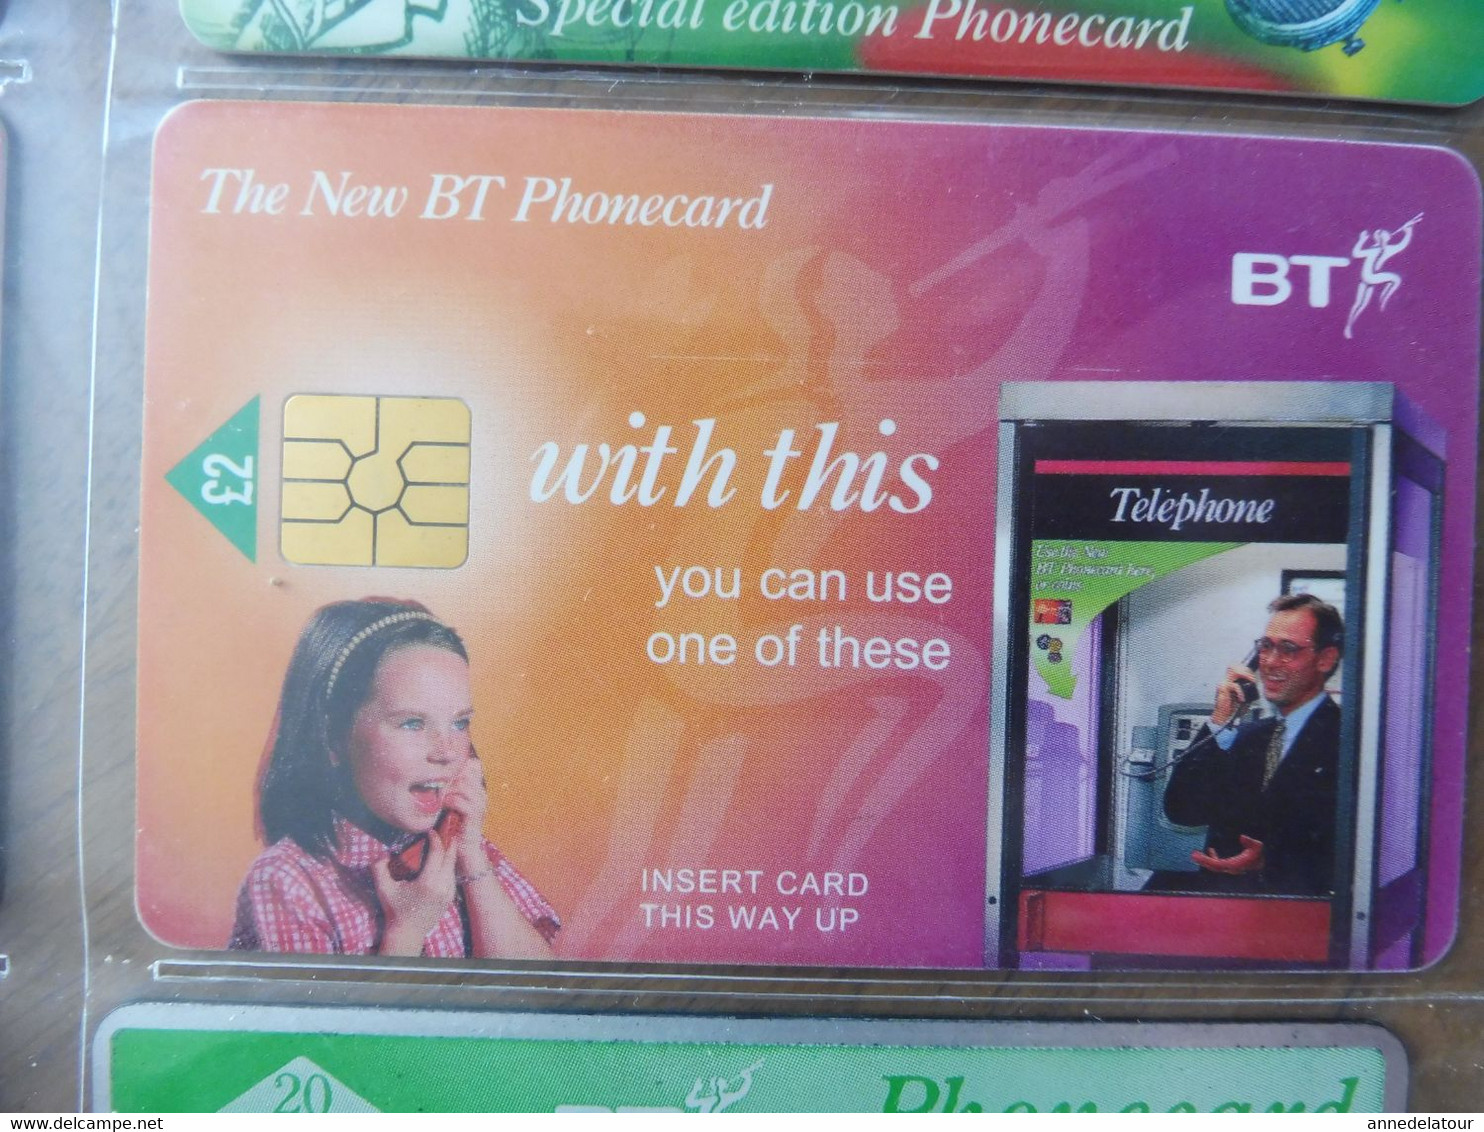 10 Phonecard  BT  British Telecom  (pubs --->( Special edition, and so and  ....) Royaume Uni